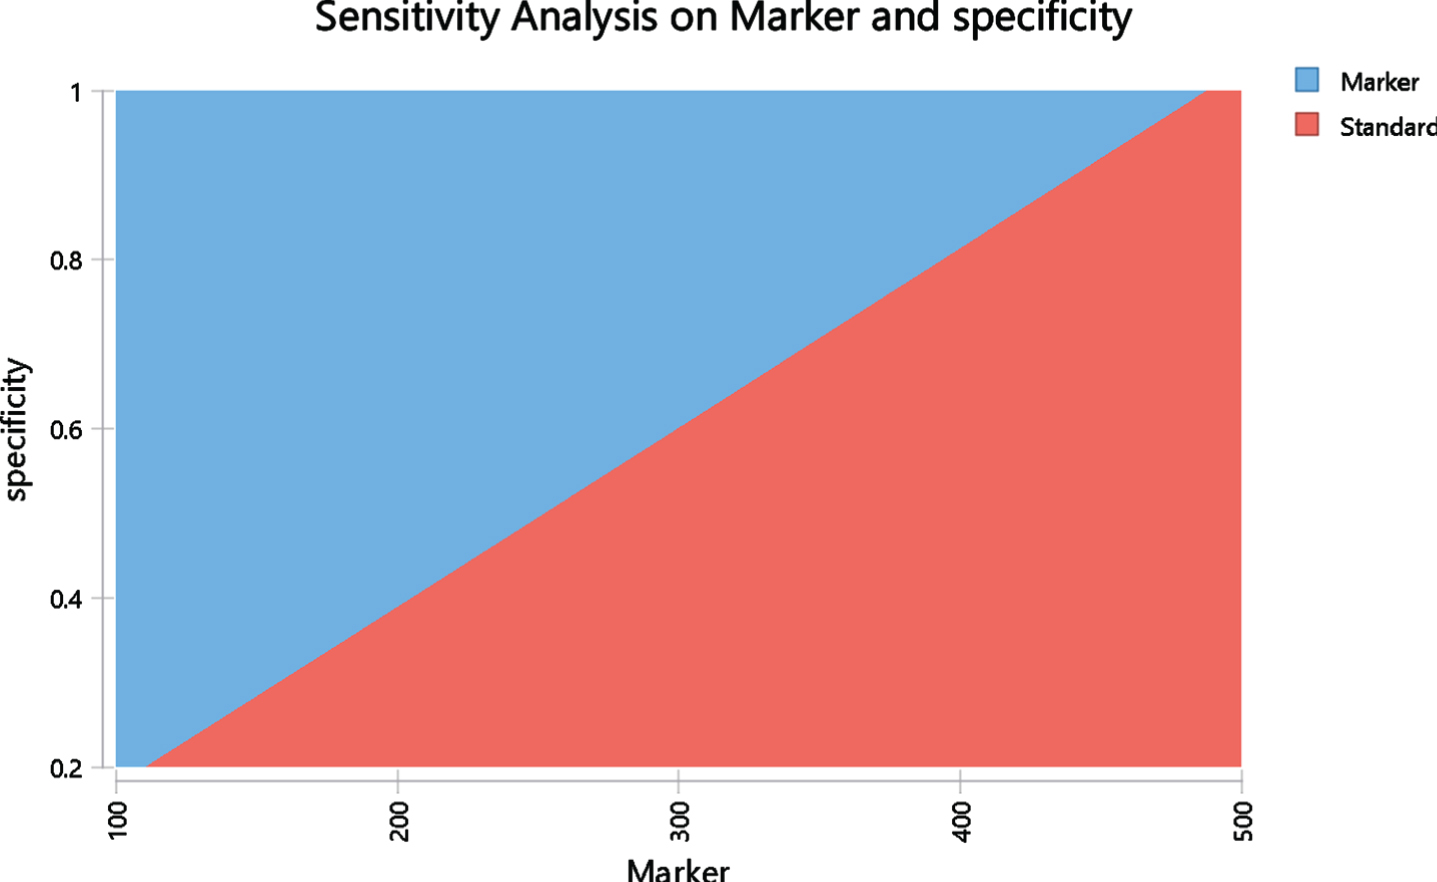 Two-way sensitivity analysis based on US model evaluating cost parity with varying cost of marker ($) and specificity of marker. The red area represents the area where the standard is less costly and the blue area is the area where the marker is less costly. The margin between these areas represent points where the costs are the same in both arms.